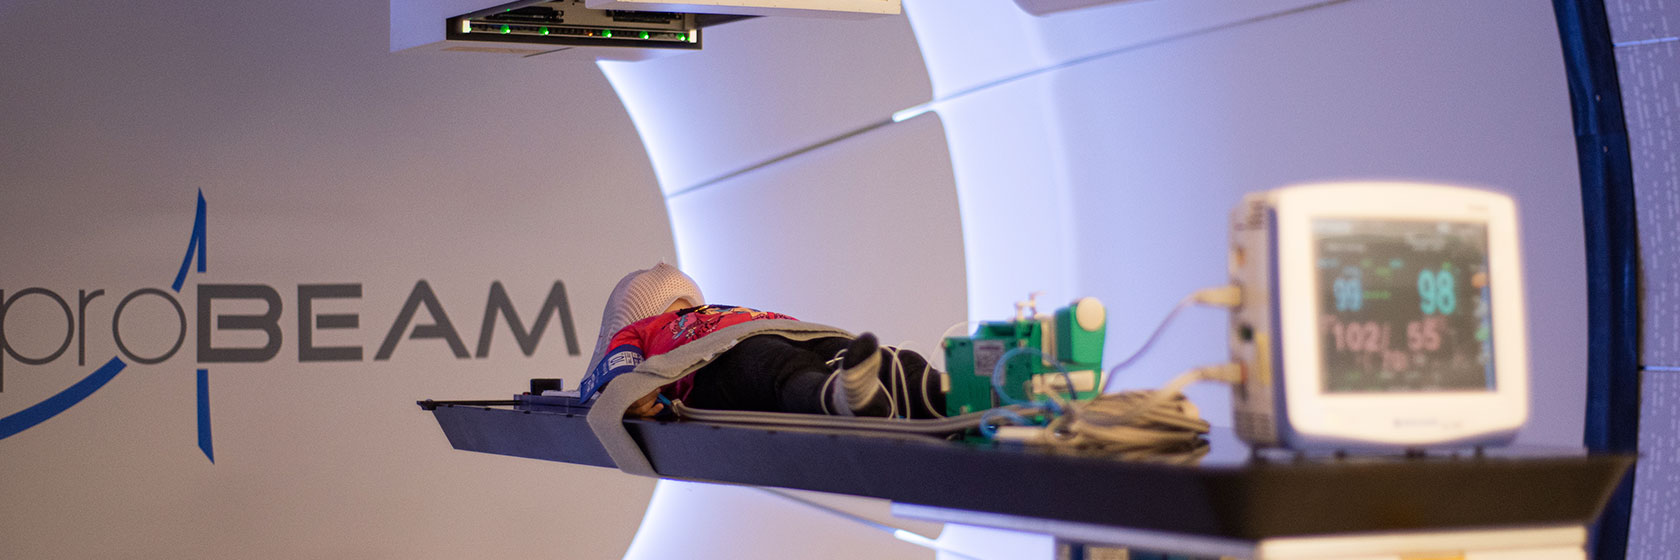 A child is undergoing proton therapy at the MIBS Proton Therapy Center